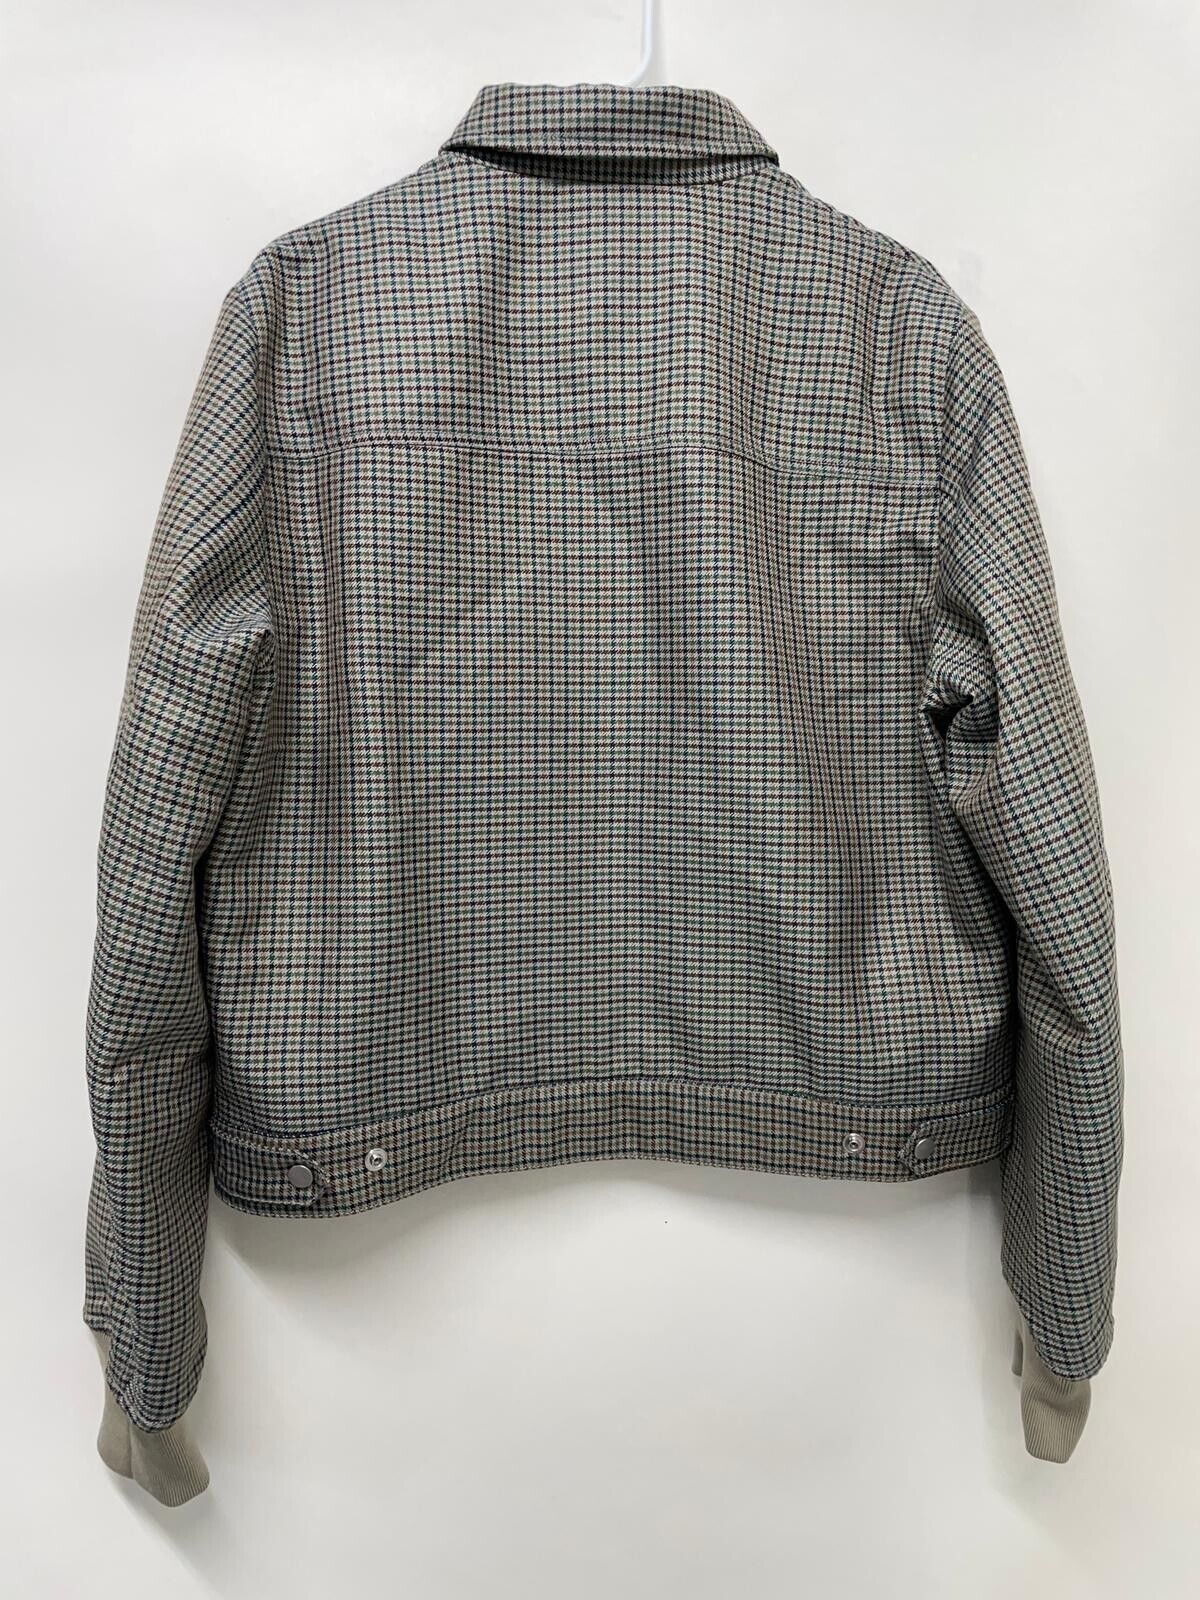 A Personal Note 73 Mens M Houndstooth Plaid Zip Up Wool Blend Jacket Bomber